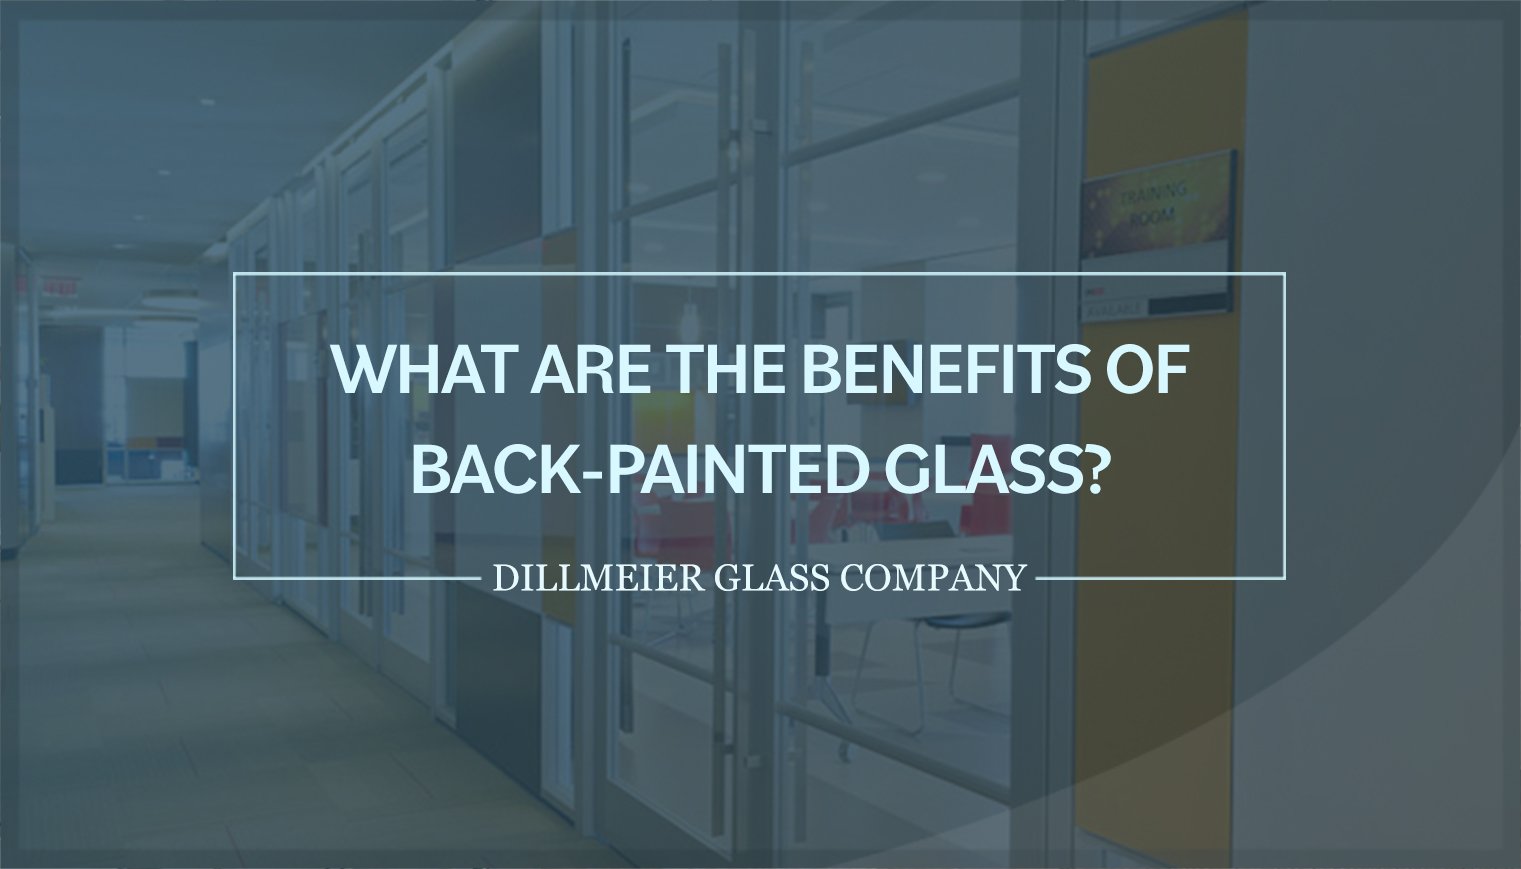 Modern office with glass walls and text on top - What Are the Benefits of Back-Painted Glass?